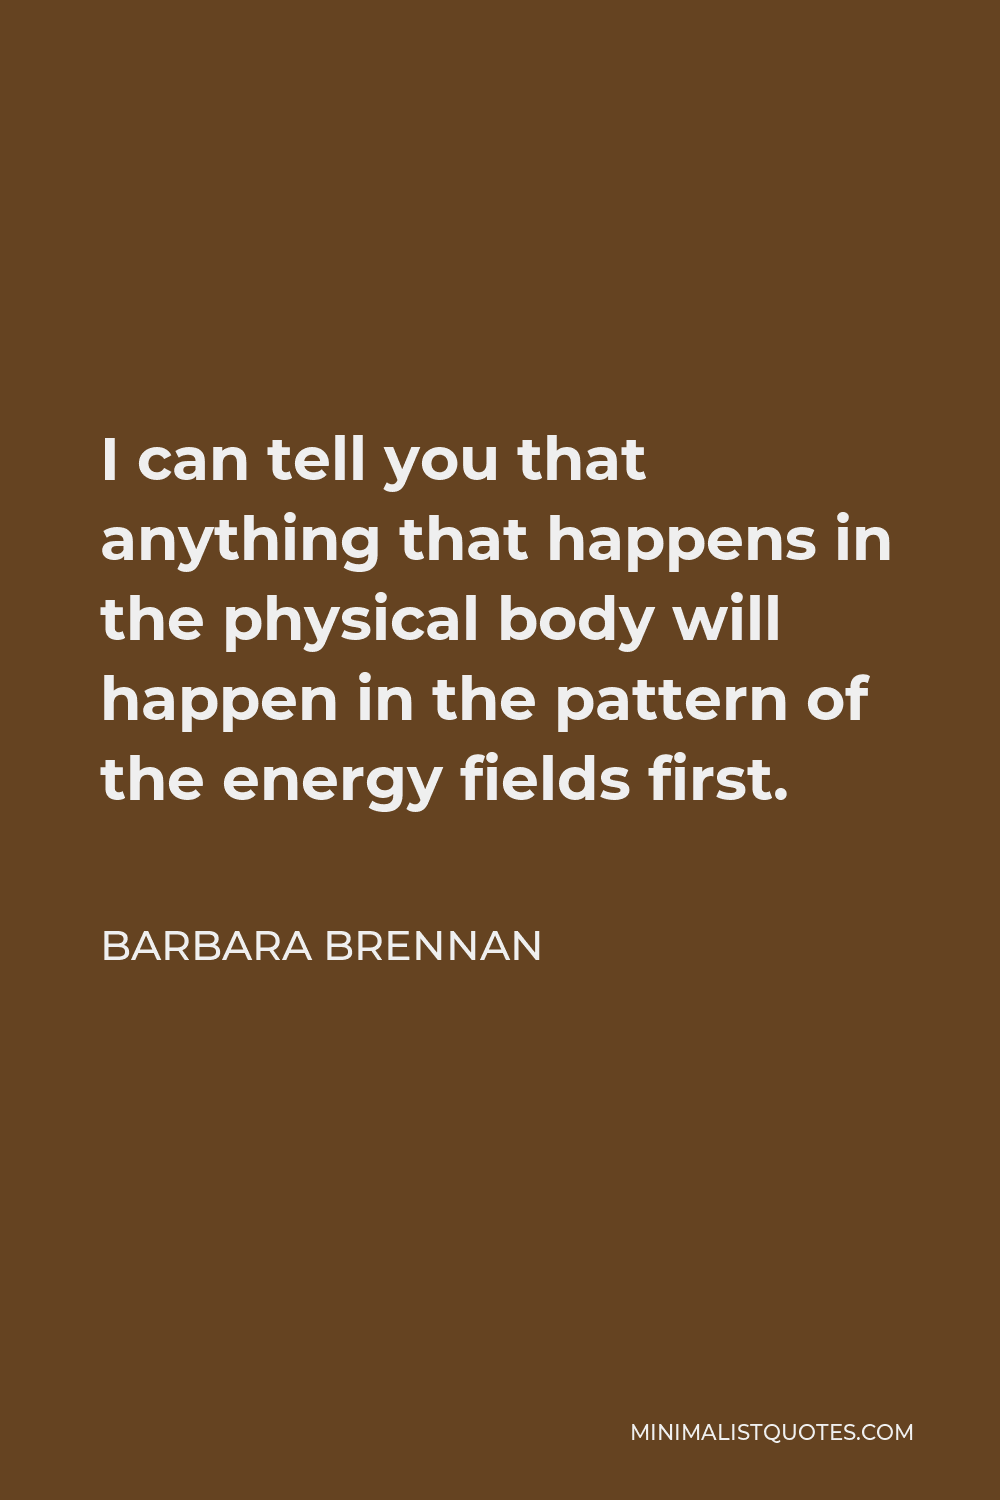 Barbara Brennan Quote - I can tell you that anything that happens in the physical body will happen in the pattern of the energy fields first.